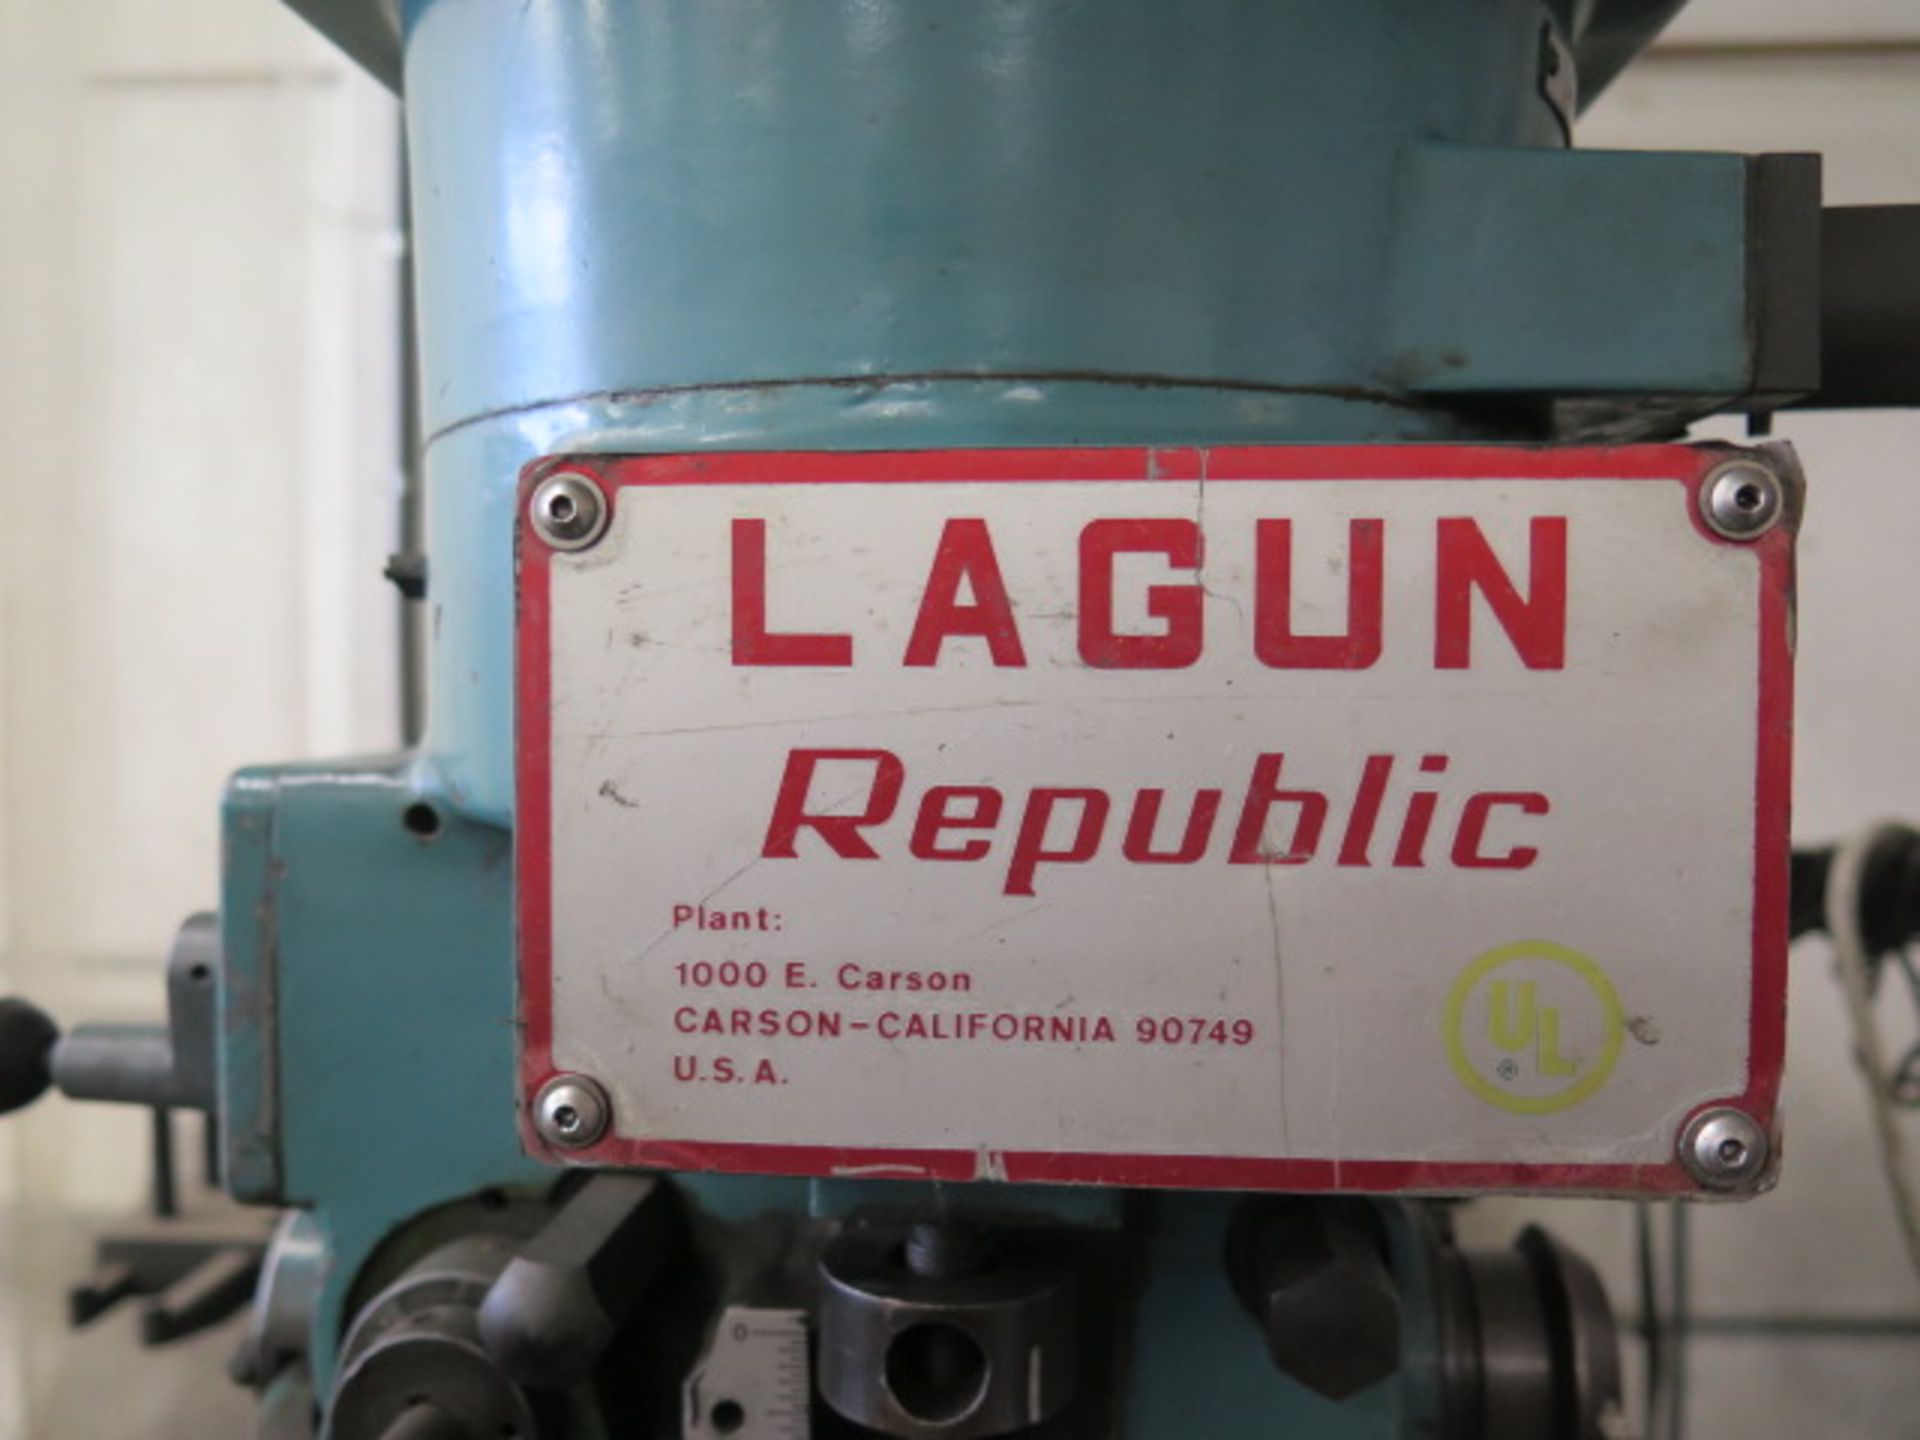 Lagun Vertical Mill s/n 11407 w/ Mitutoyo DRO, 2Hp Motor, 55-2940 RPM, 8-Spd, Chrome Ways,SOLD AS IS - Image 7 of 7